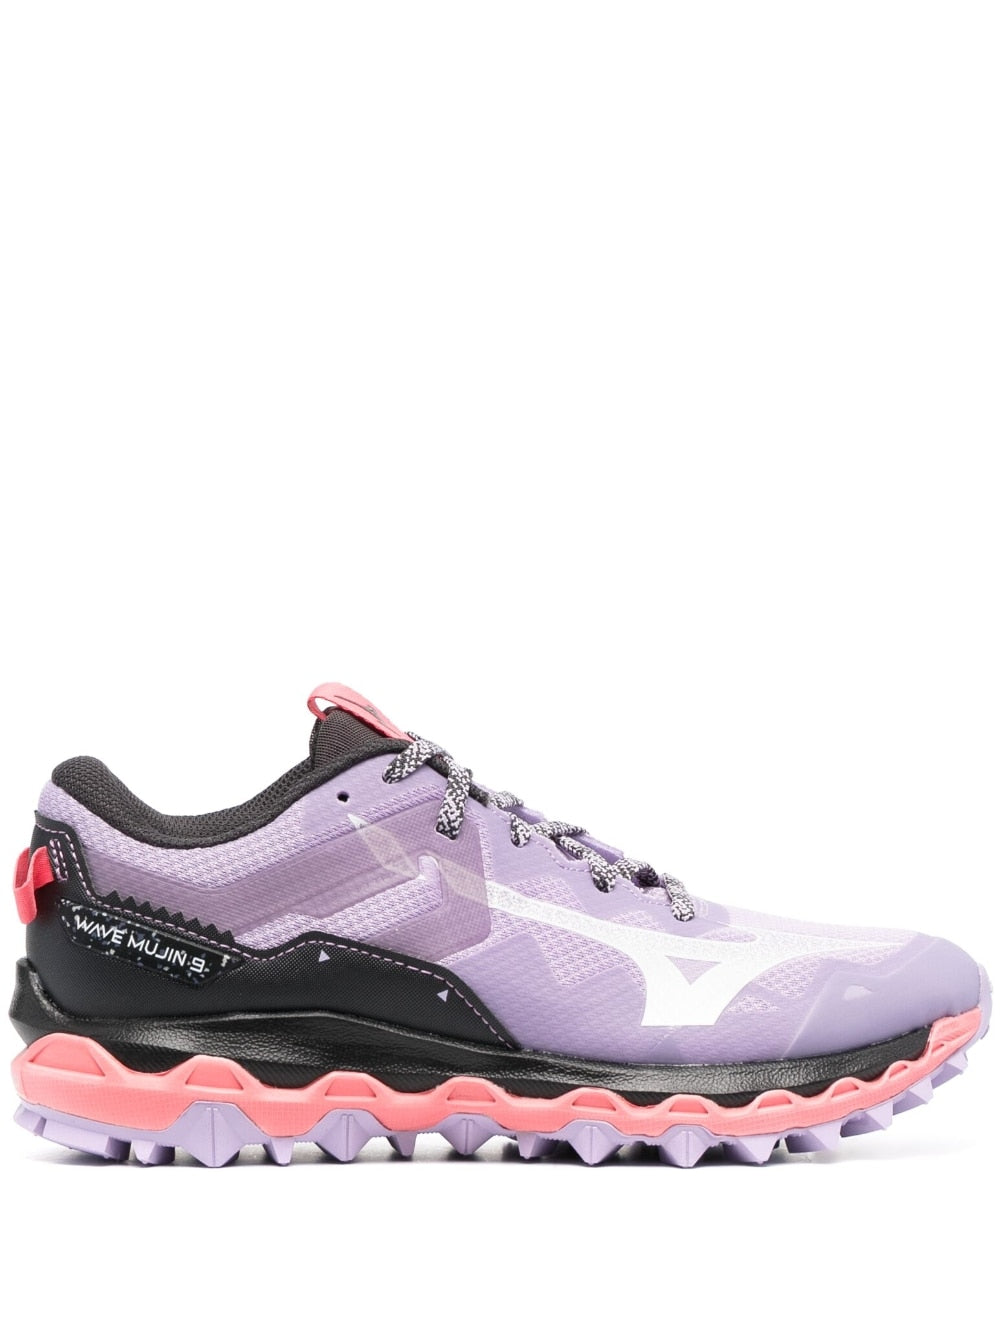 Lilac/white/coral Wave mujin 9 sneakers